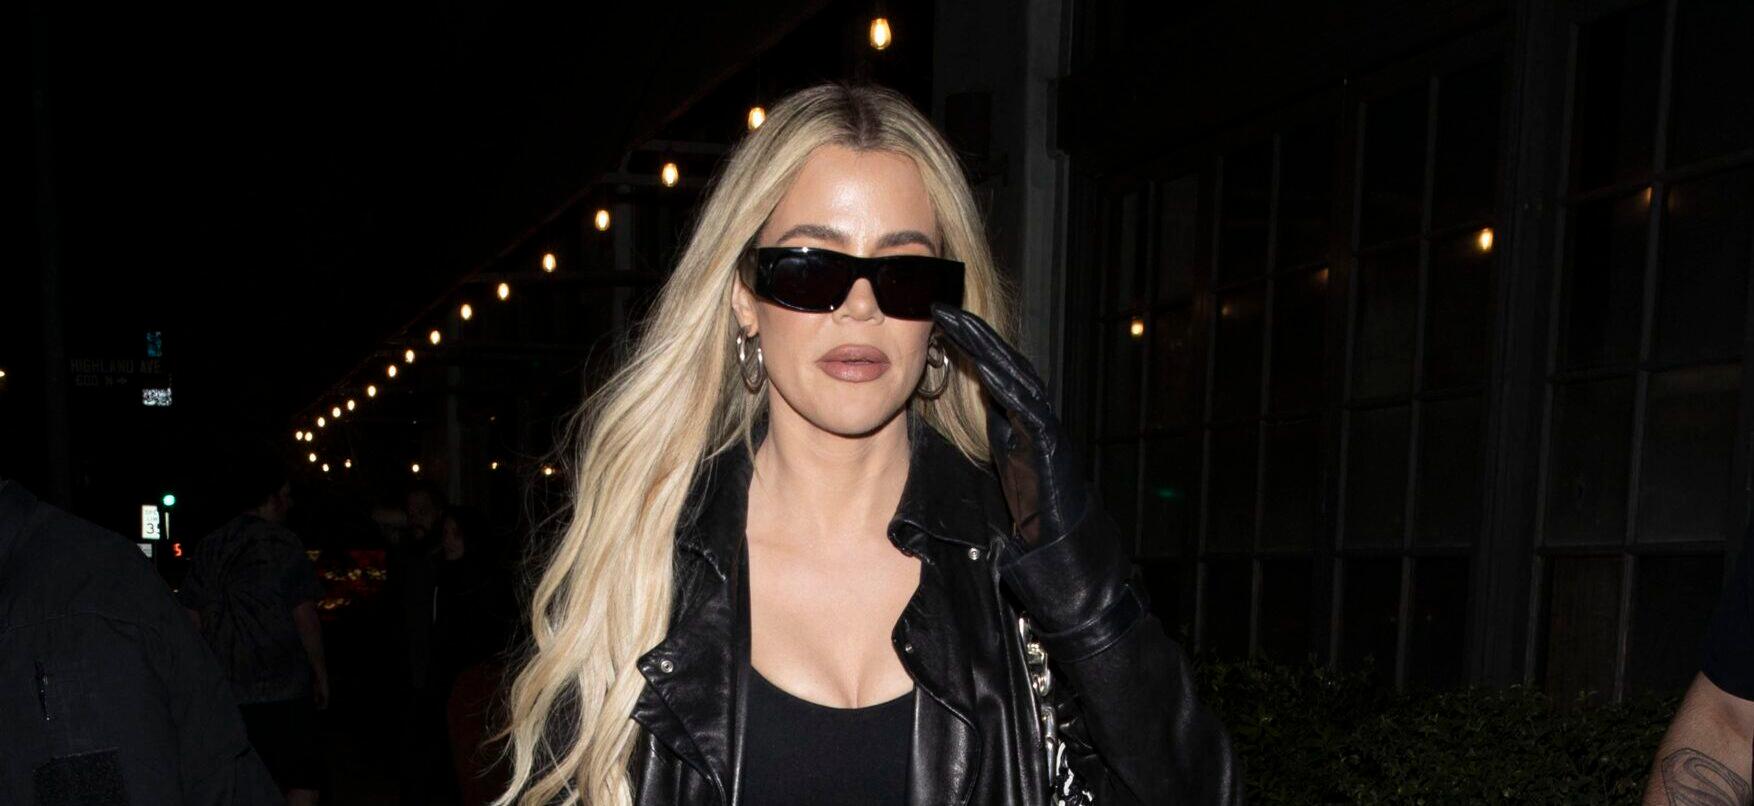 Khloe Kardashian Gets Candid About Struggles Of Early Morning Workout: ‘Abusive’